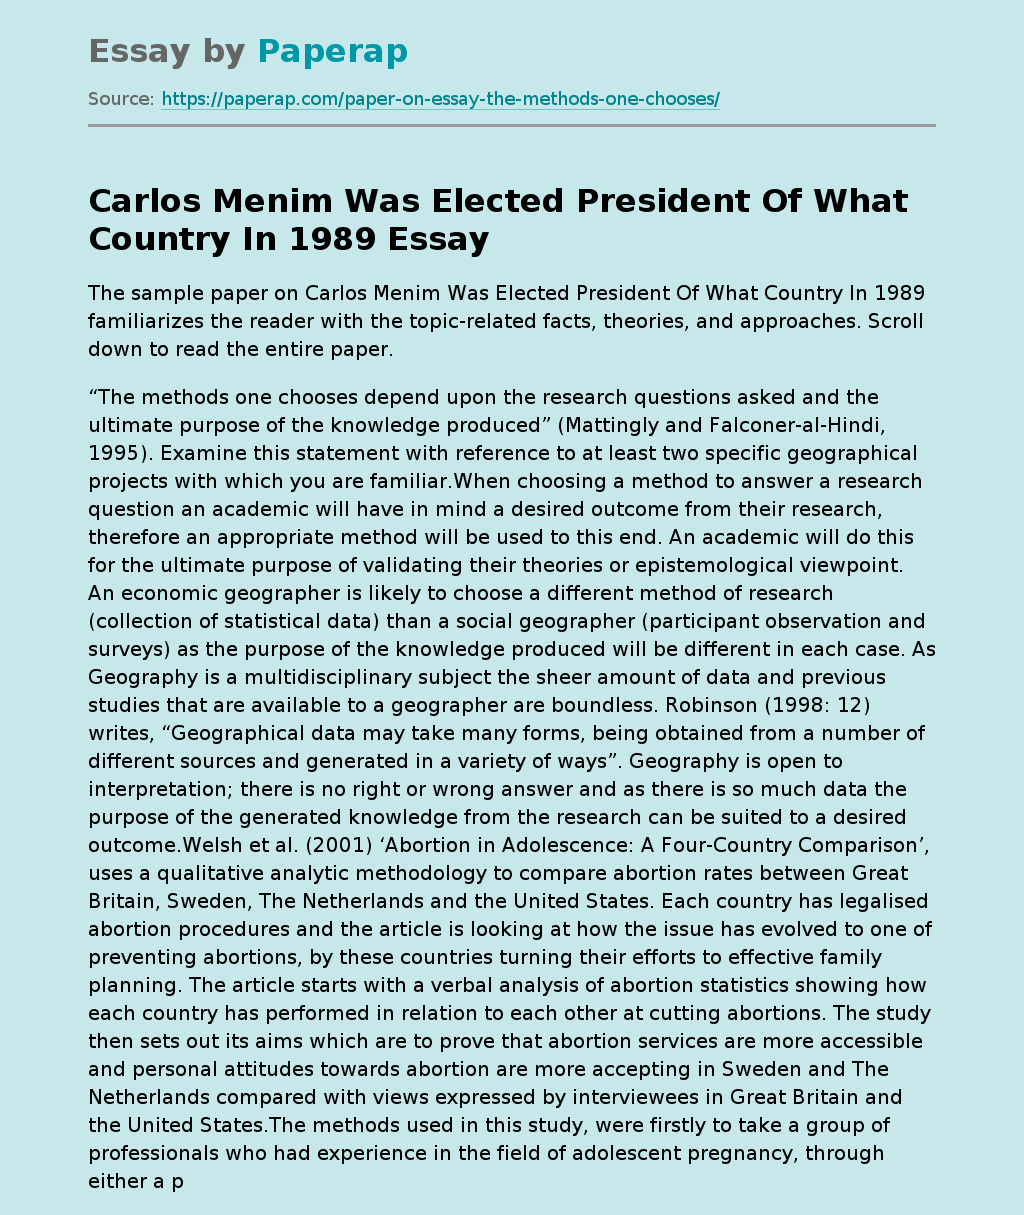 Carlos Menim Was Elected President Of What Country In 1989